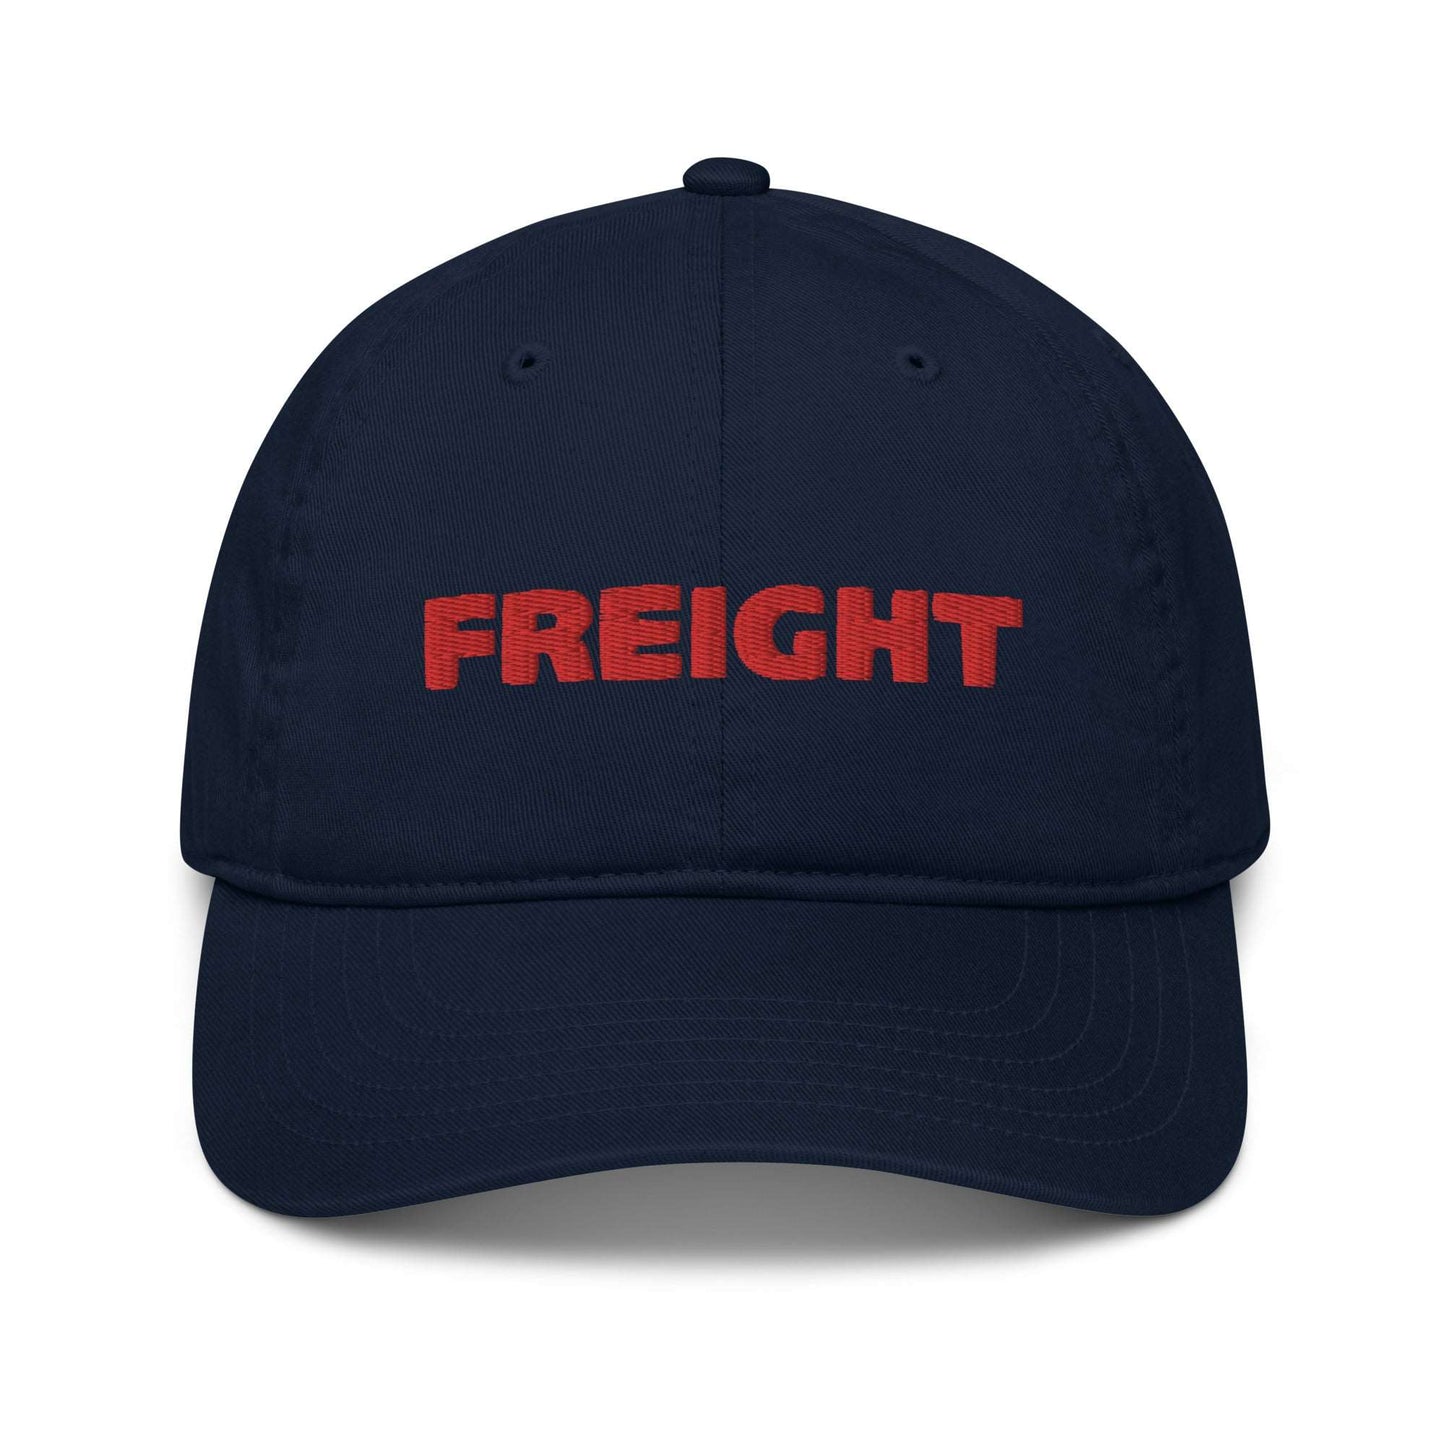 (Limited) Freight x Trxck Hat